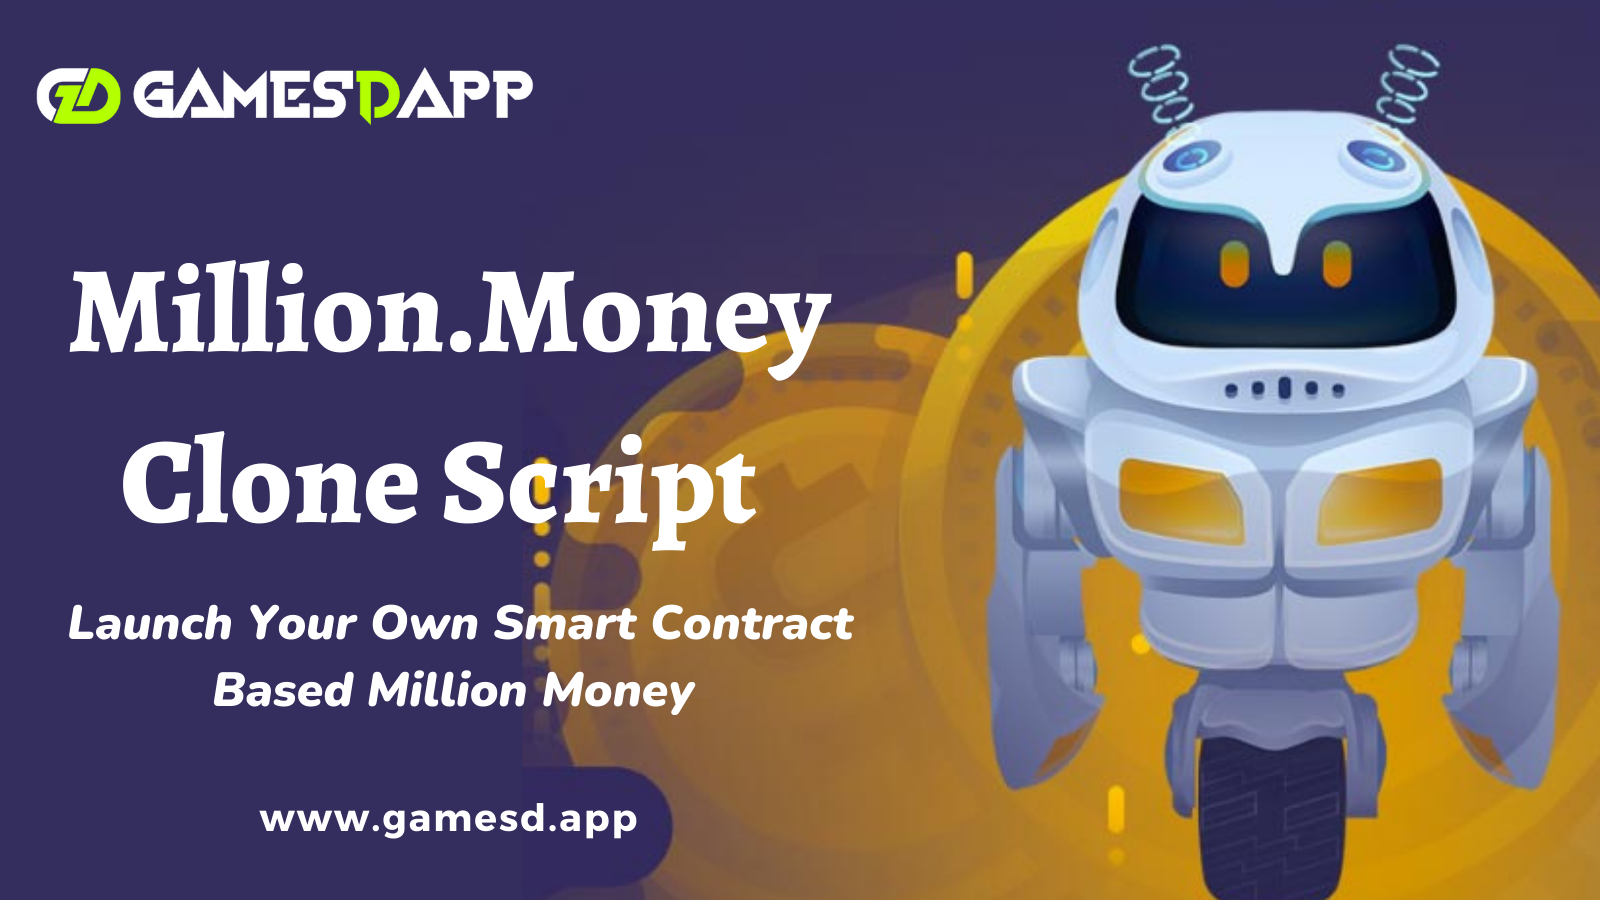 Article about million money clone - to launch smart contract based mlm like million money